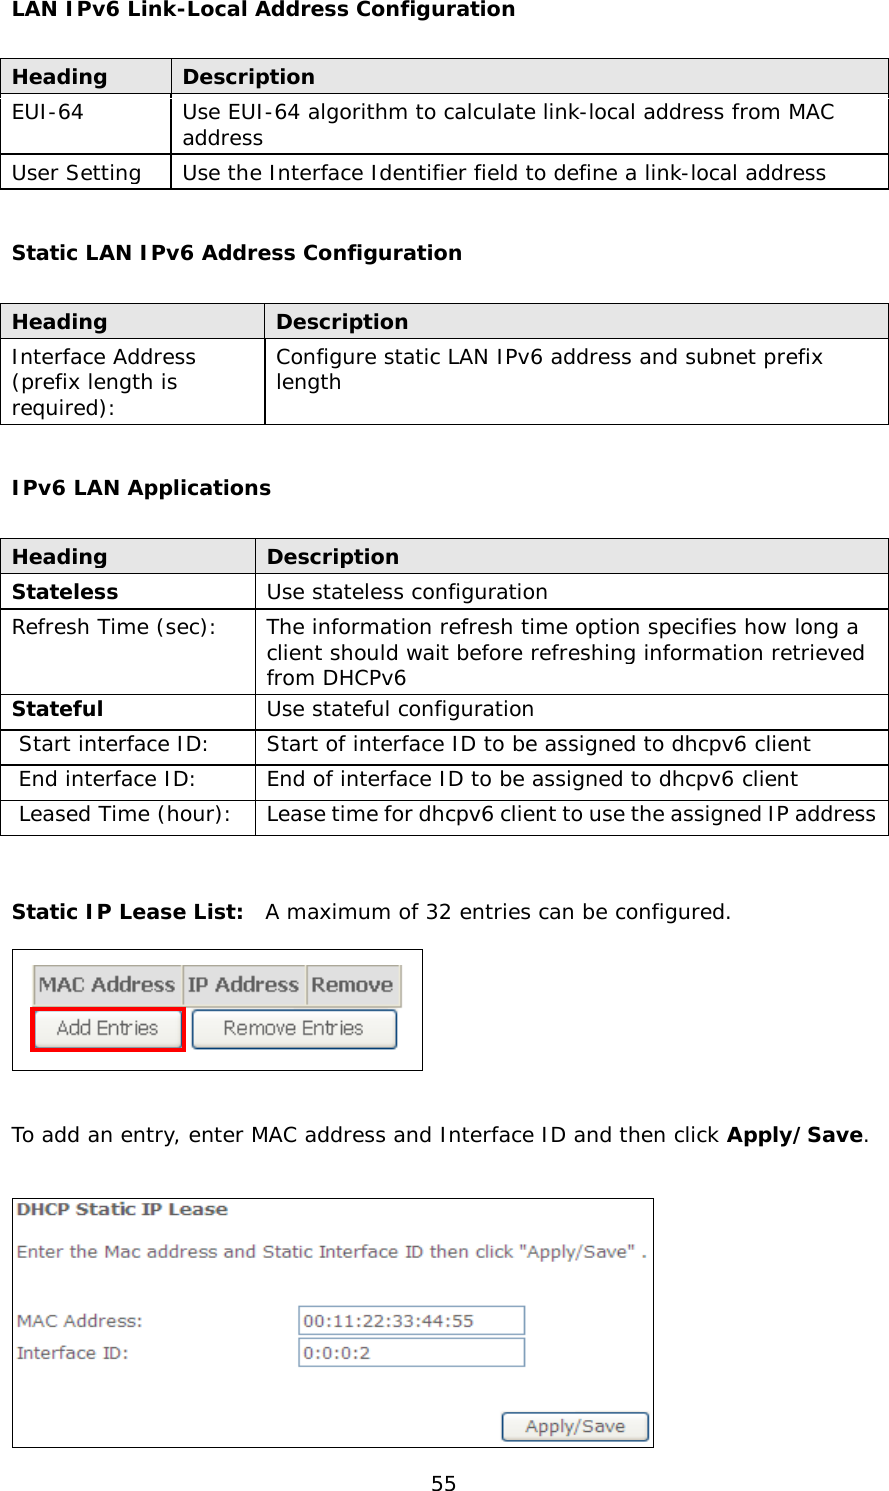  55 LAN IPv6 Link-Local Address Configuration  Heading Description EUI-64 Use EUI-64 algorithm to calculate link-local address from MAC address User Setting Use the Interface Identifier field to define a link-local address  Static LAN IPv6 Address Configuration  Heading Description Interface Address  (prefix length is required): Configure static LAN IPv6 address and subnet prefix length  IPv6 LAN Applications  Heading Description Stateless Use stateless configuration Refresh Time (sec): The information refresh time option specifies how long a client should wait before refreshing information retrieved from DHCPv6 Stateful Use stateful configuration  Start interface ID: Start of interface ID to be assigned to dhcpv6 client  End interface ID: End of interface ID to be assigned to dhcpv6 client  Leased Time (hour): Lease time for dhcpv6 client to use the assigned IP address   Static IP Lease List:  A maximum of 32 entries can be configured.    To add an entry, enter MAC address and Interface ID and then click Apply/Save.   